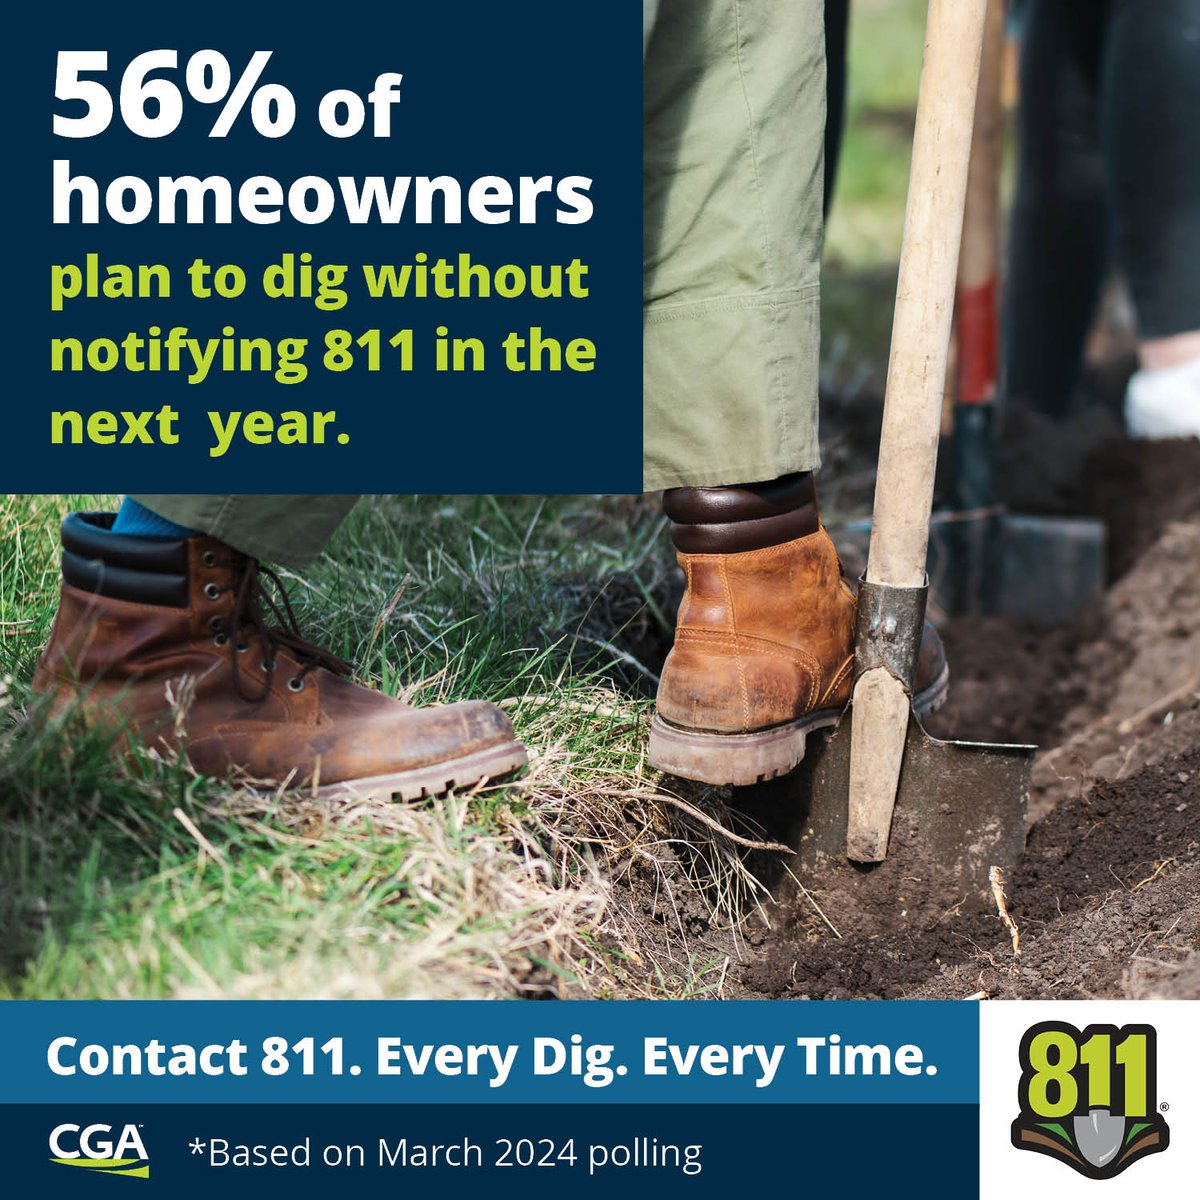 Yes, the Dig Safe law includes property owners, too. digsafe.com or 811 for all projects that require you to move the earth! #SafeDiggingMonth #NSDM @CGAConnect